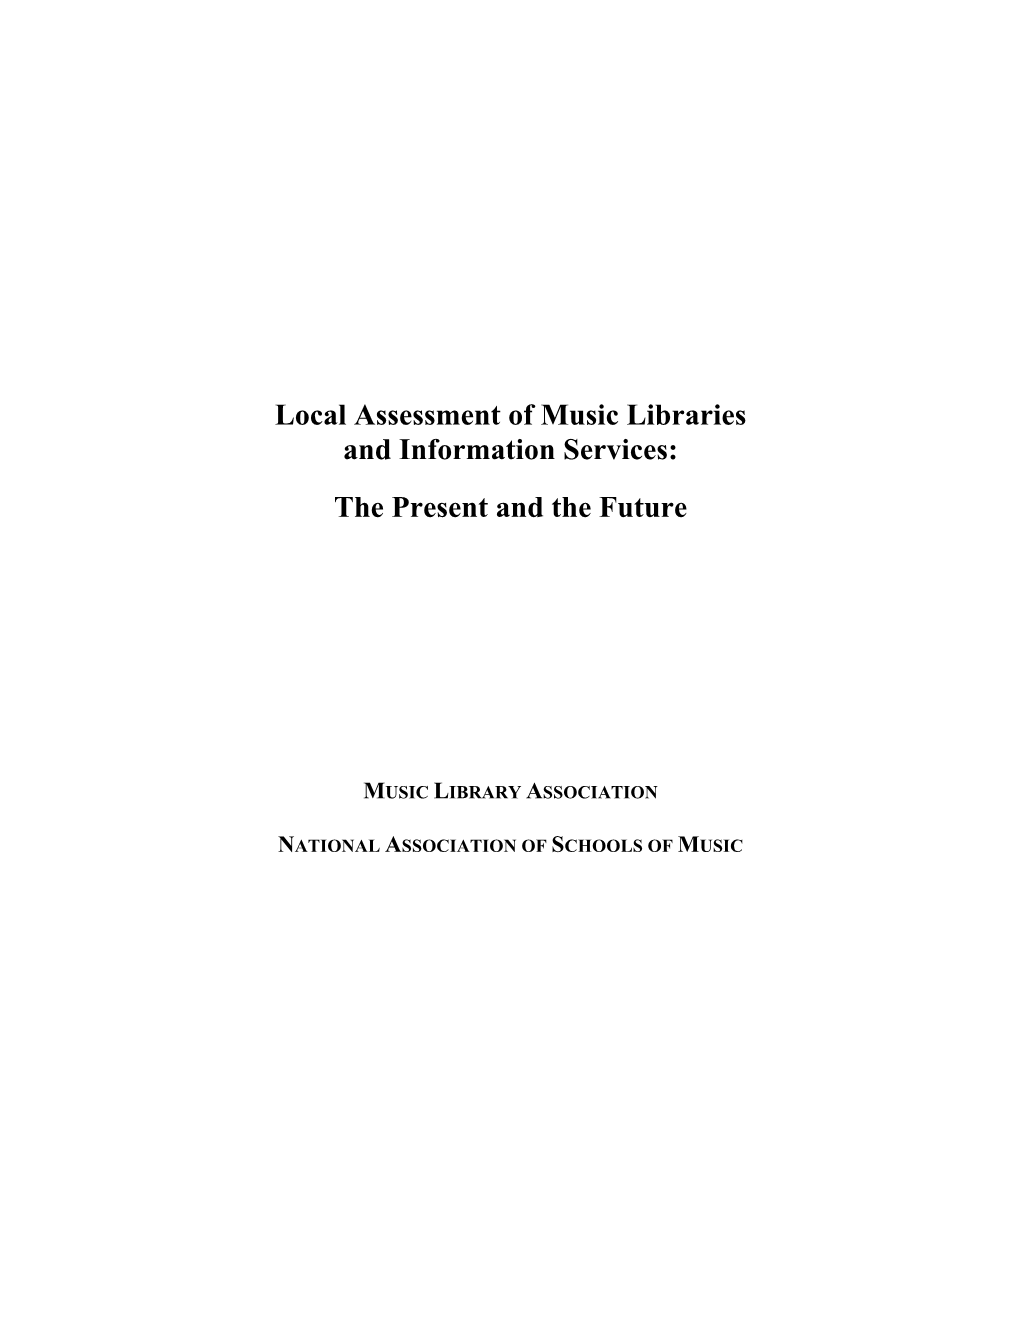 Local Assessment of Music Libraries and Information Services